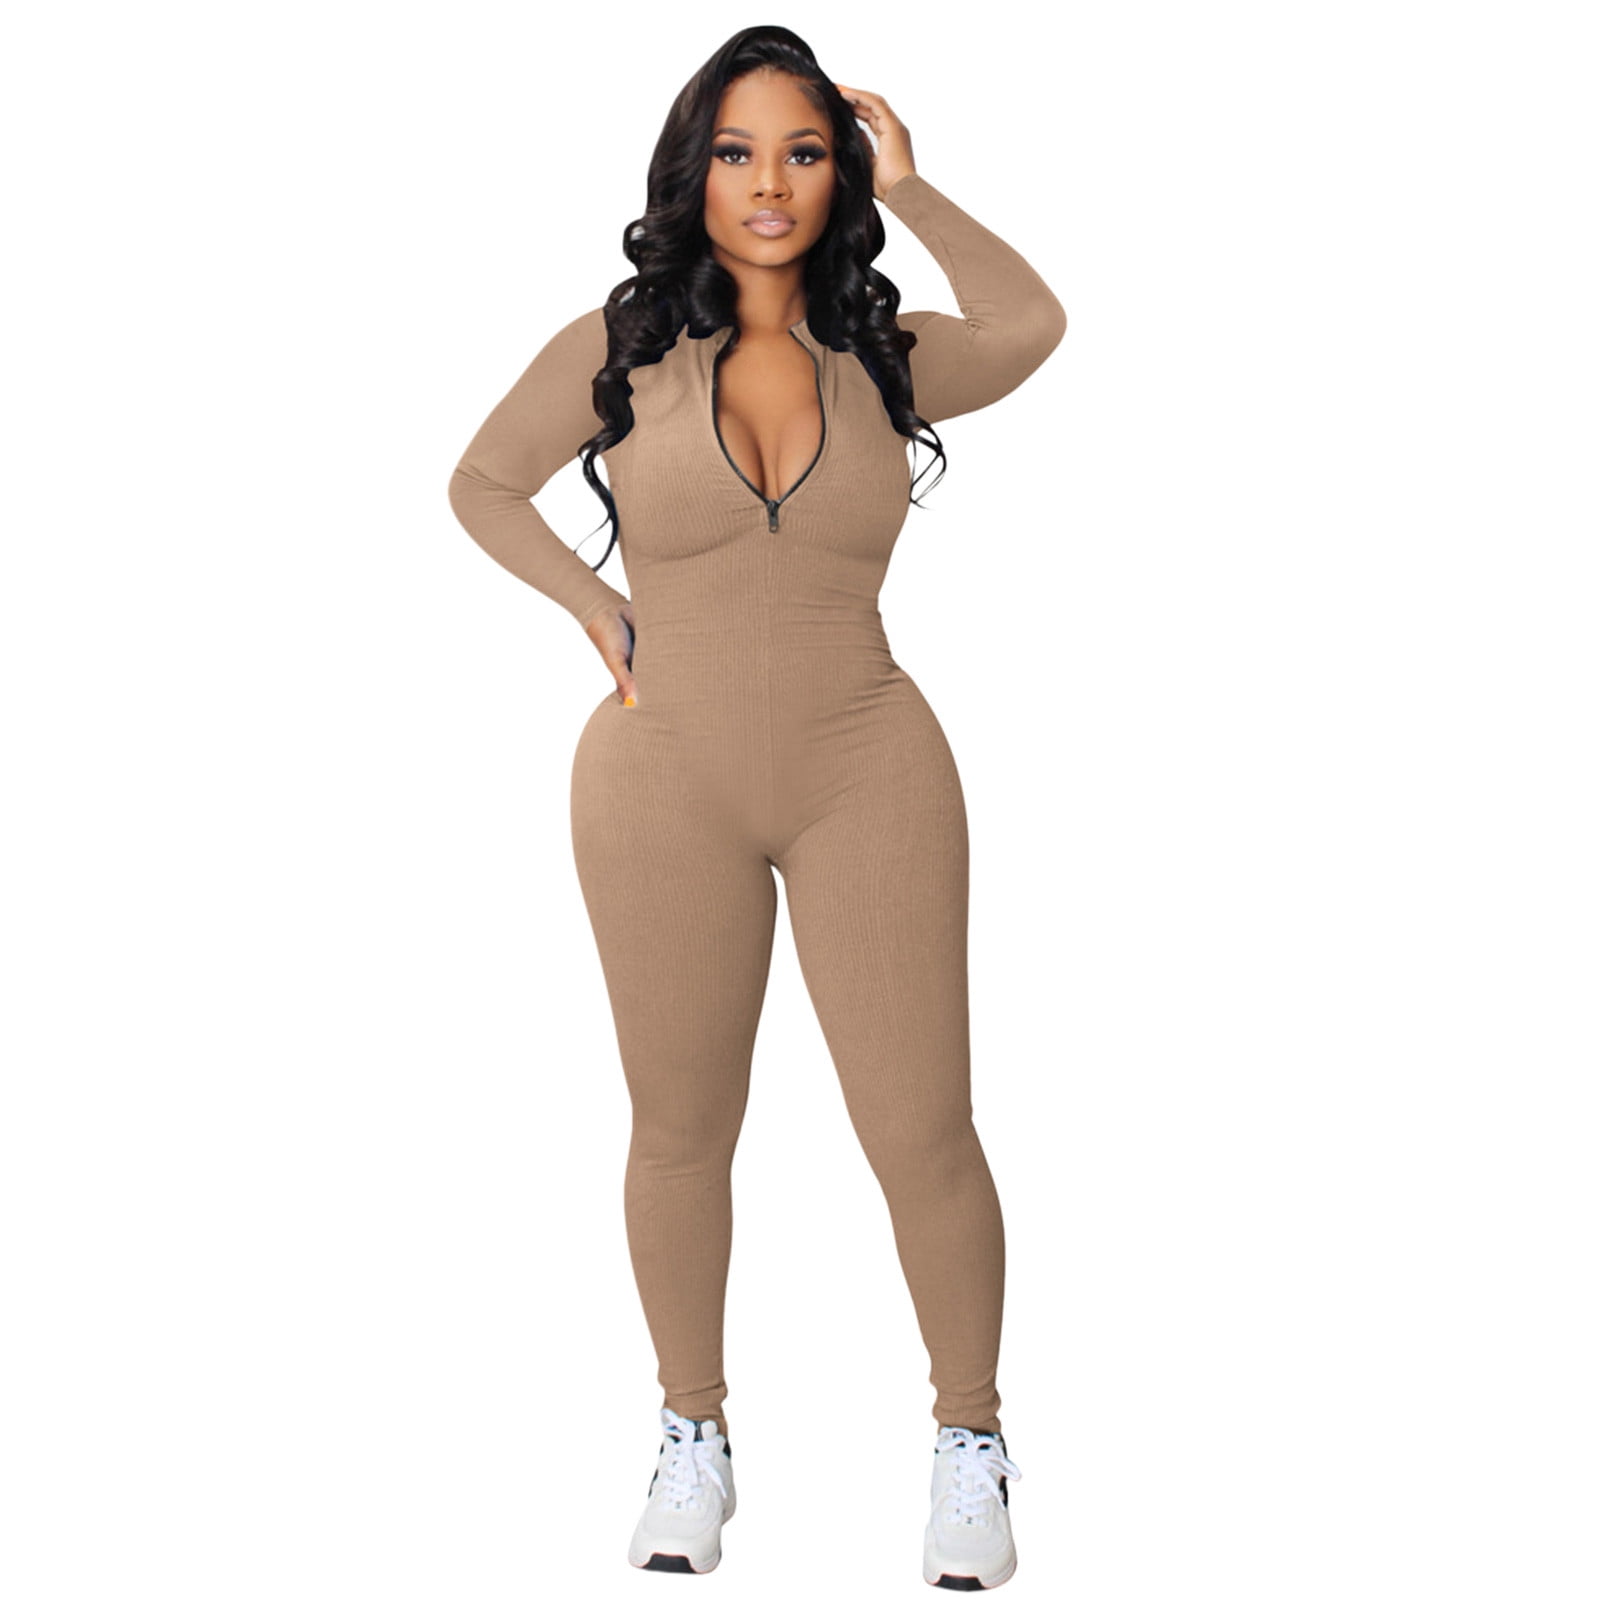 lystmrge Lounge Romper Spandex Jumpsuits for Women Sexy Casual Shorts  Jumper Women's Zipper V Neck Long Sleeve Jumpsuit Rompers Bodysuit Catsuit  Sport